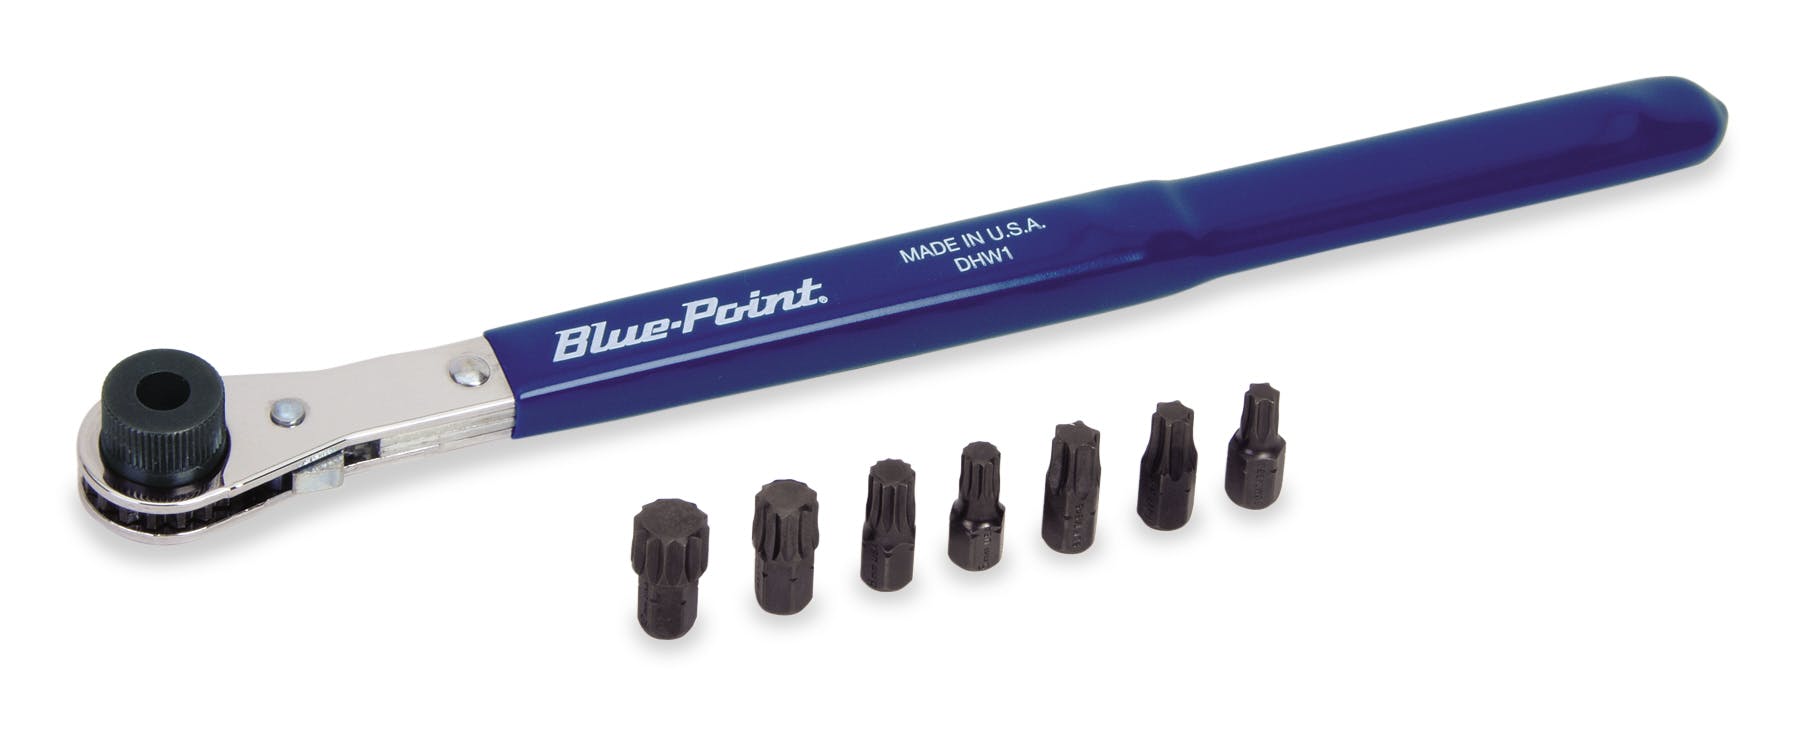 As sold by Snap On. Blue Point Blue Point Ratchet Screwdriver with Bits 